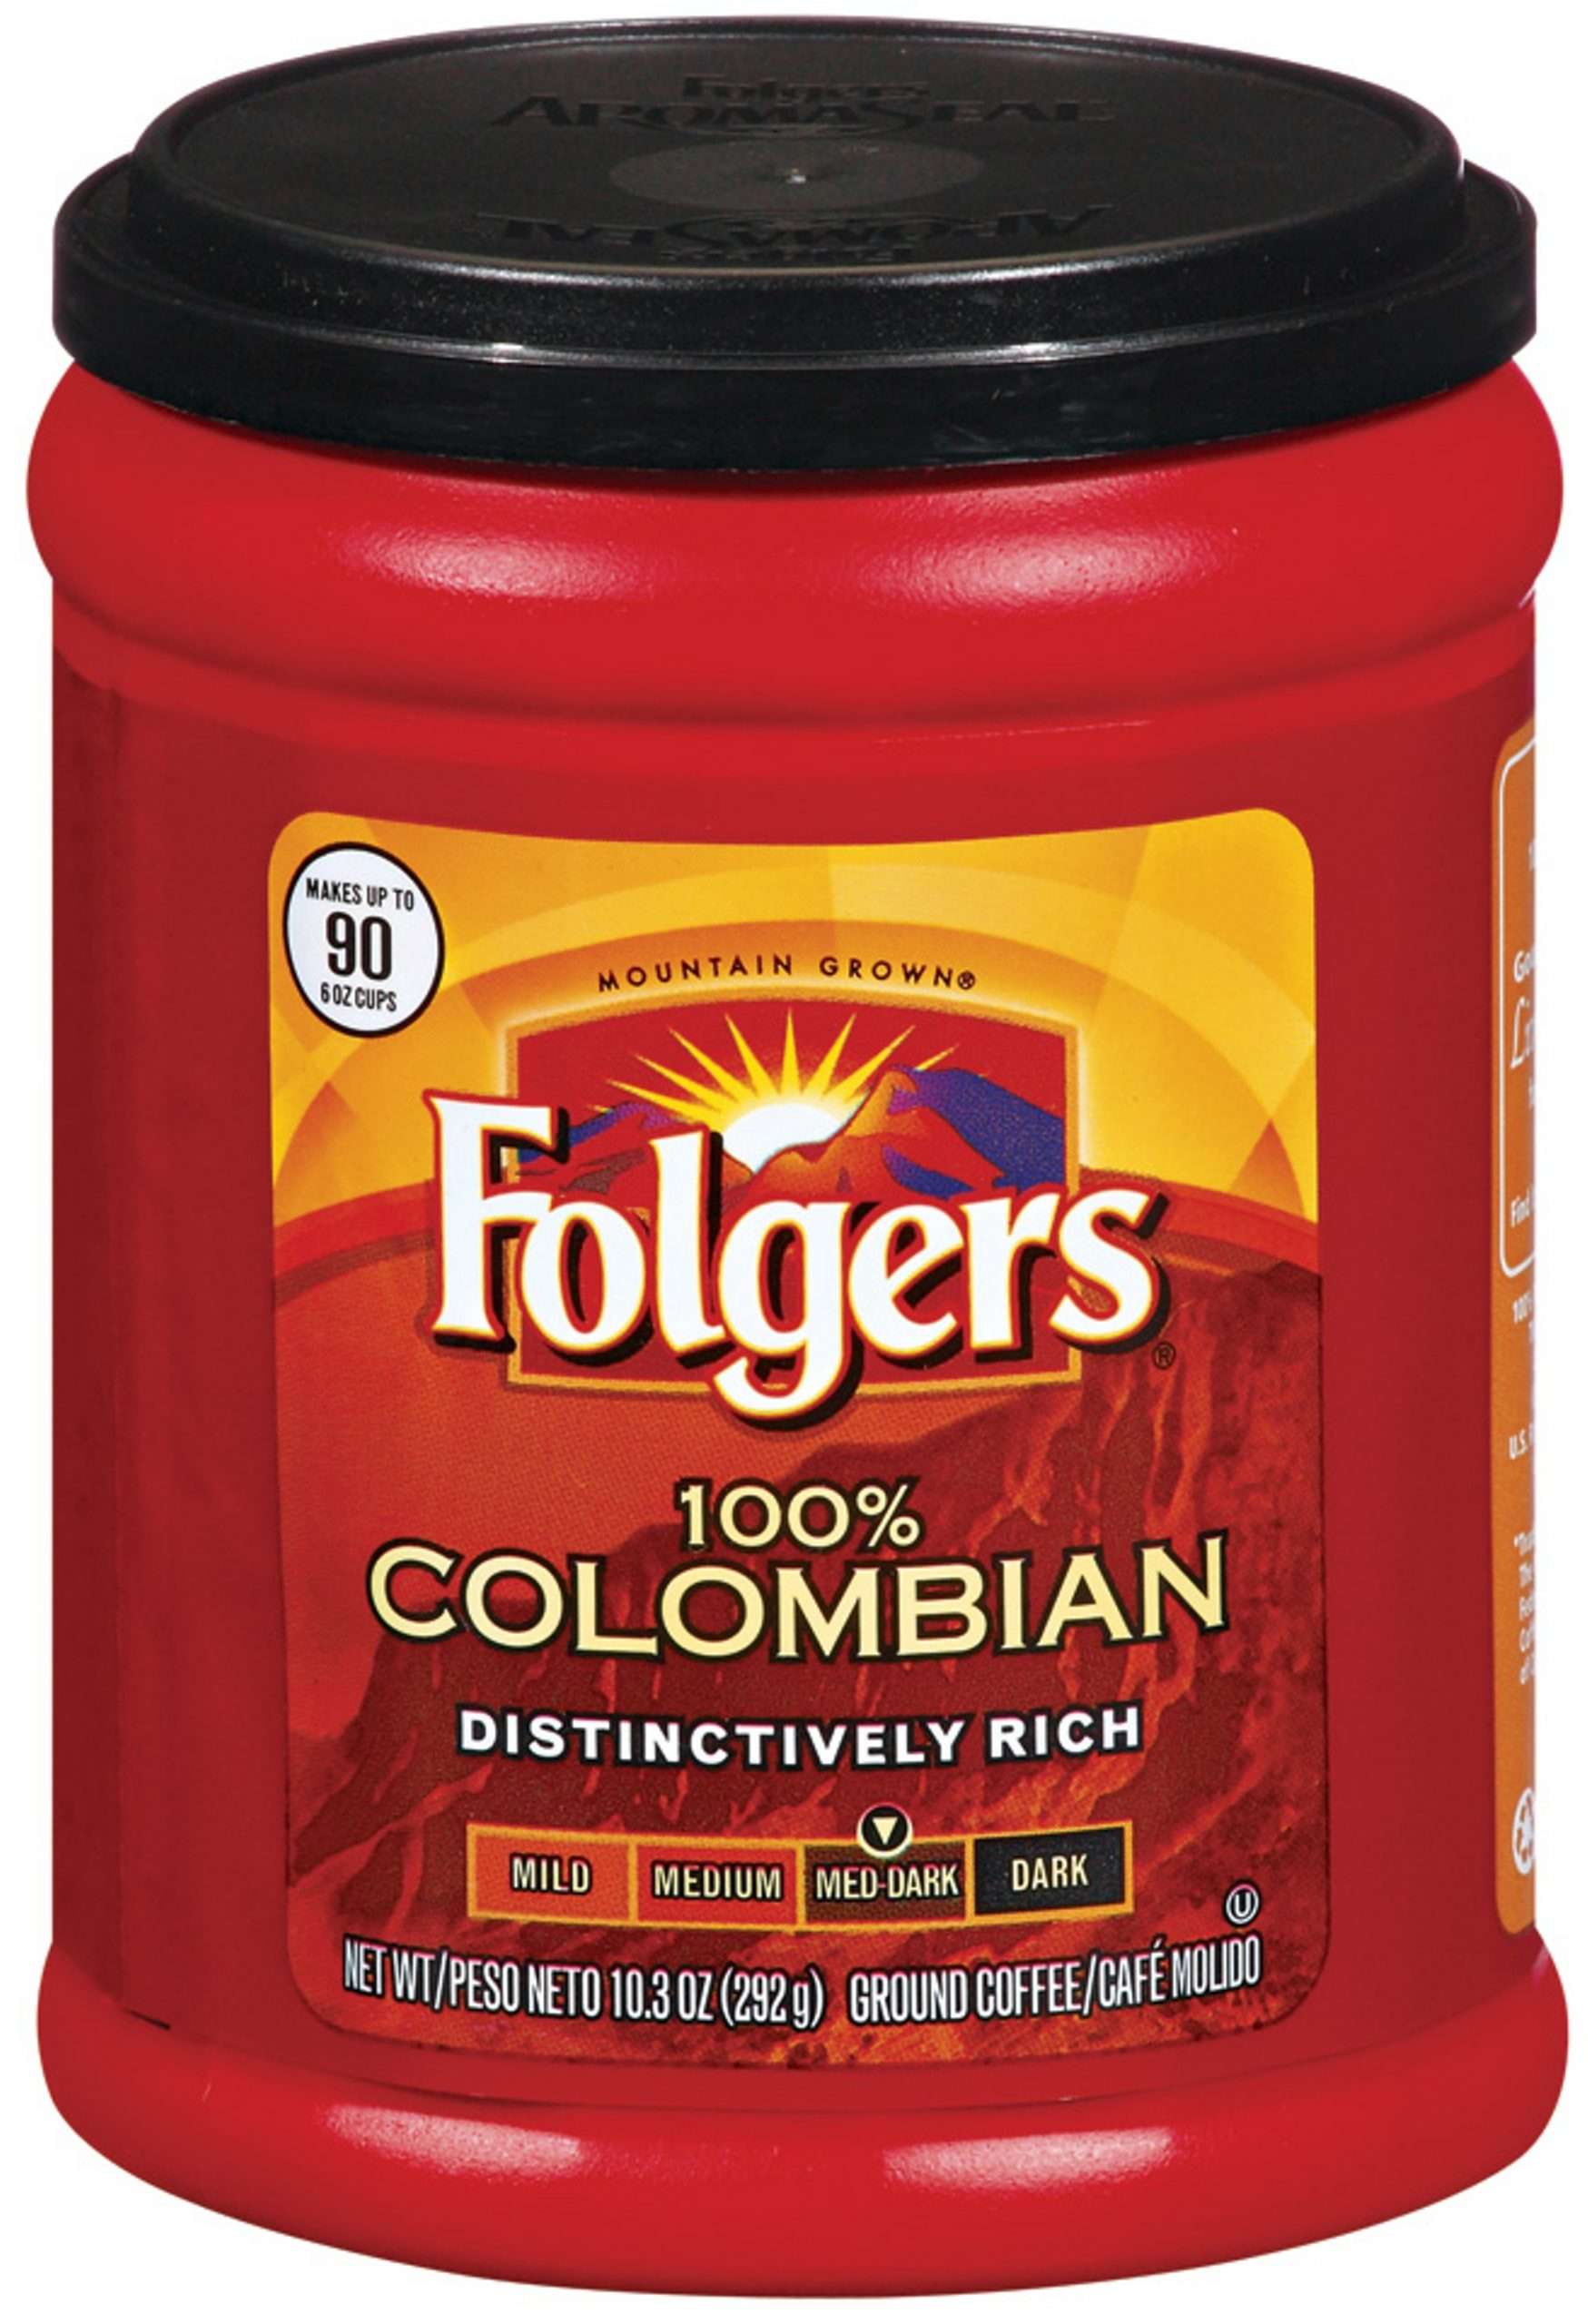 Folgers 100% Colombian Ground Coffee, 10.3 Oz.